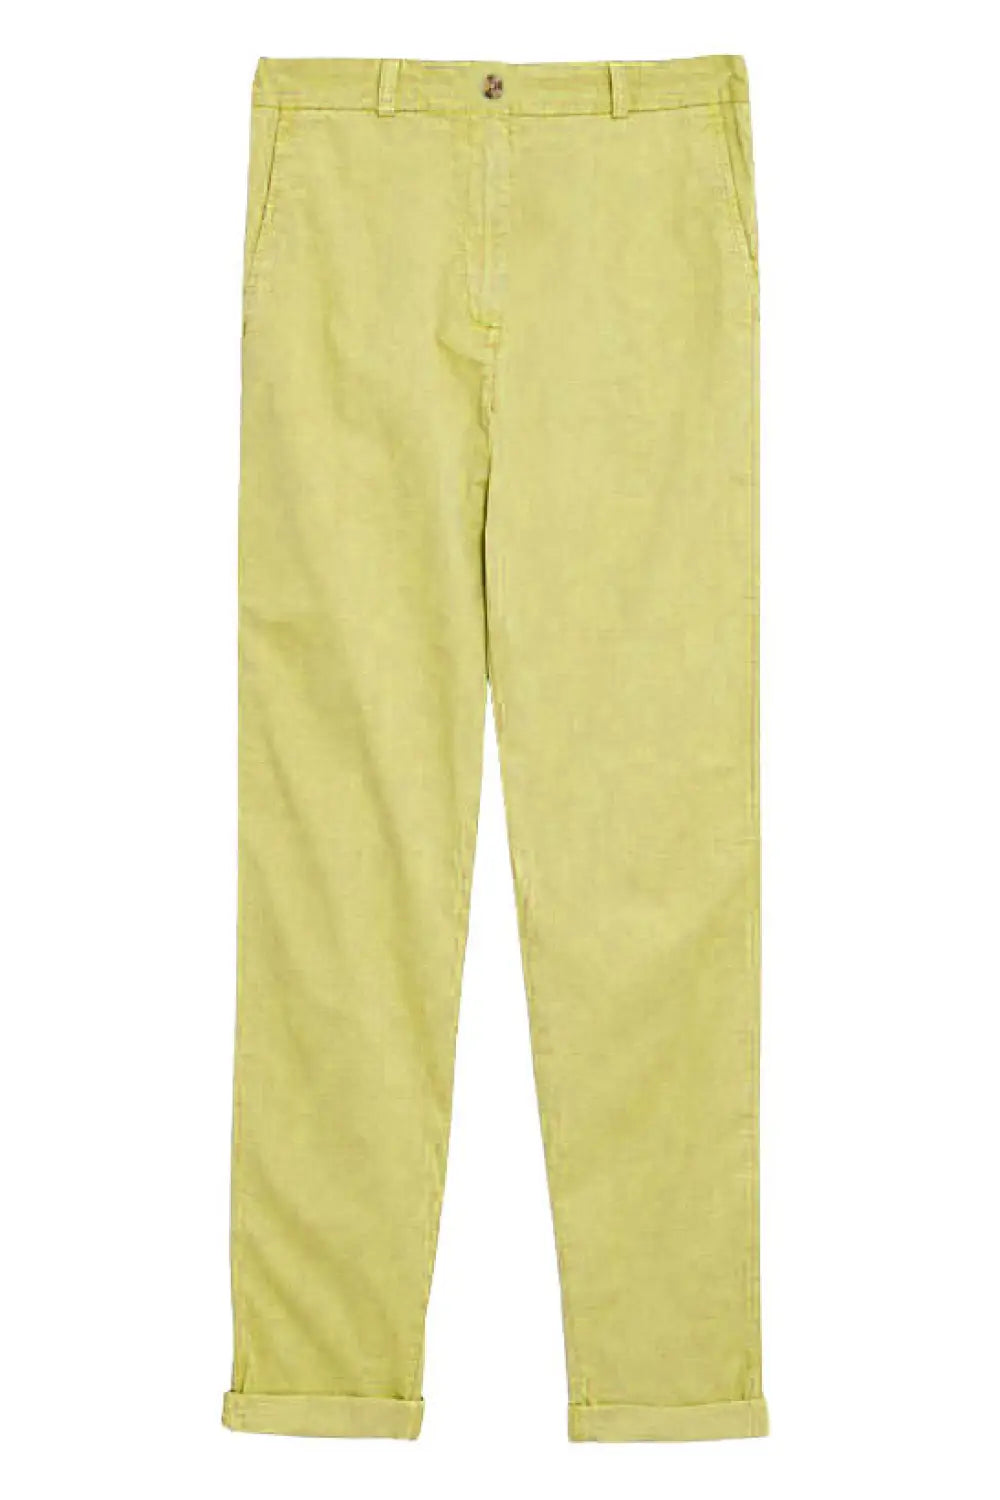 M&S Cotton Casual Chino Trousers